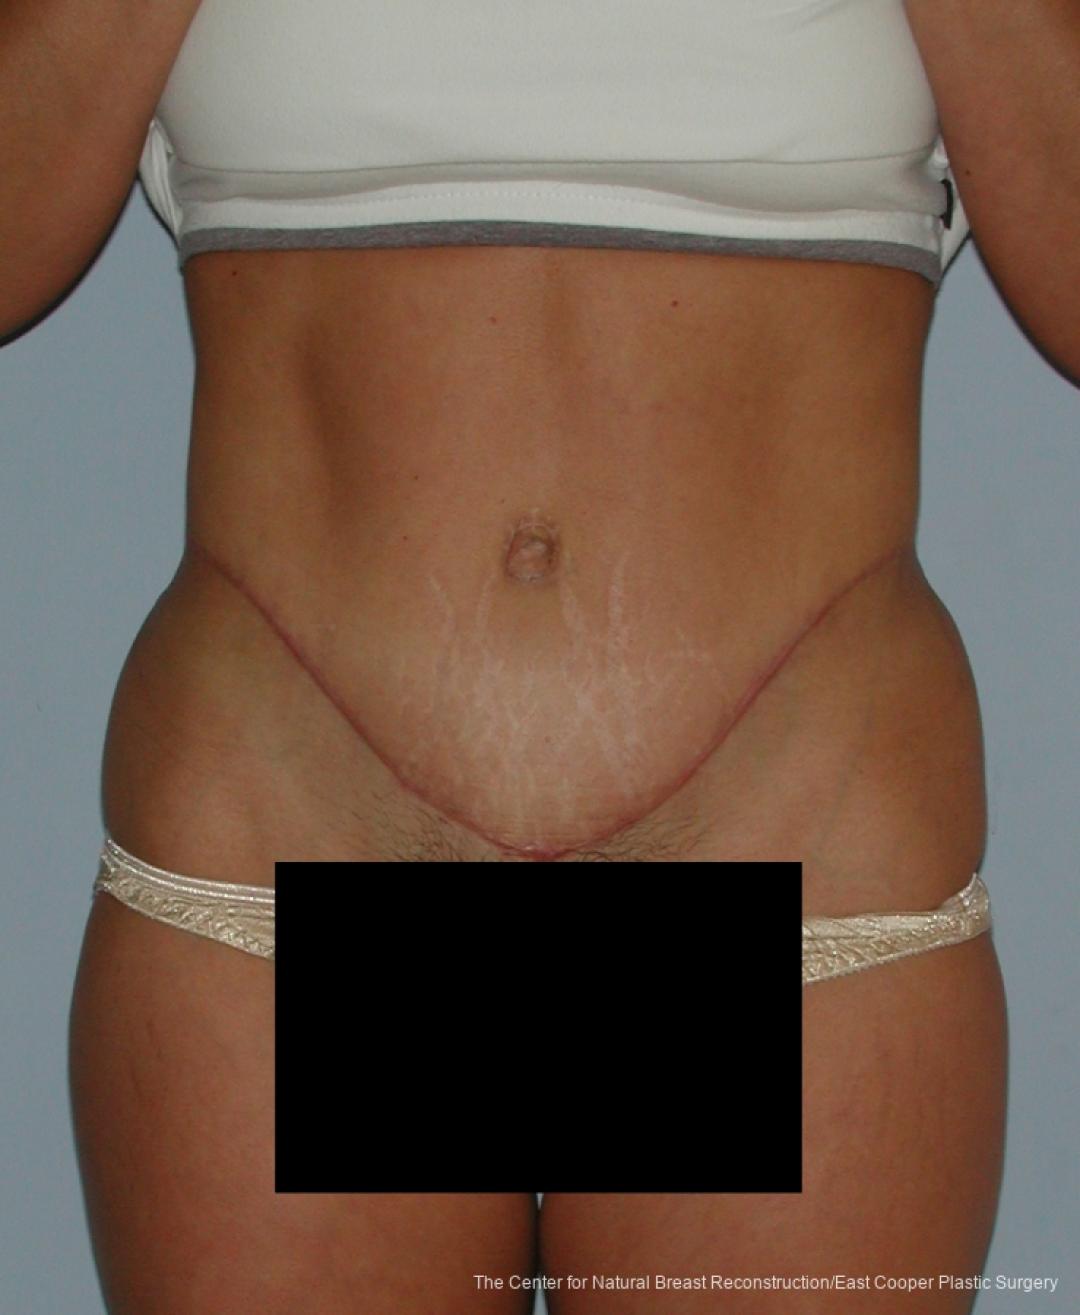 Tummy Tuck: Patient 7 - After  